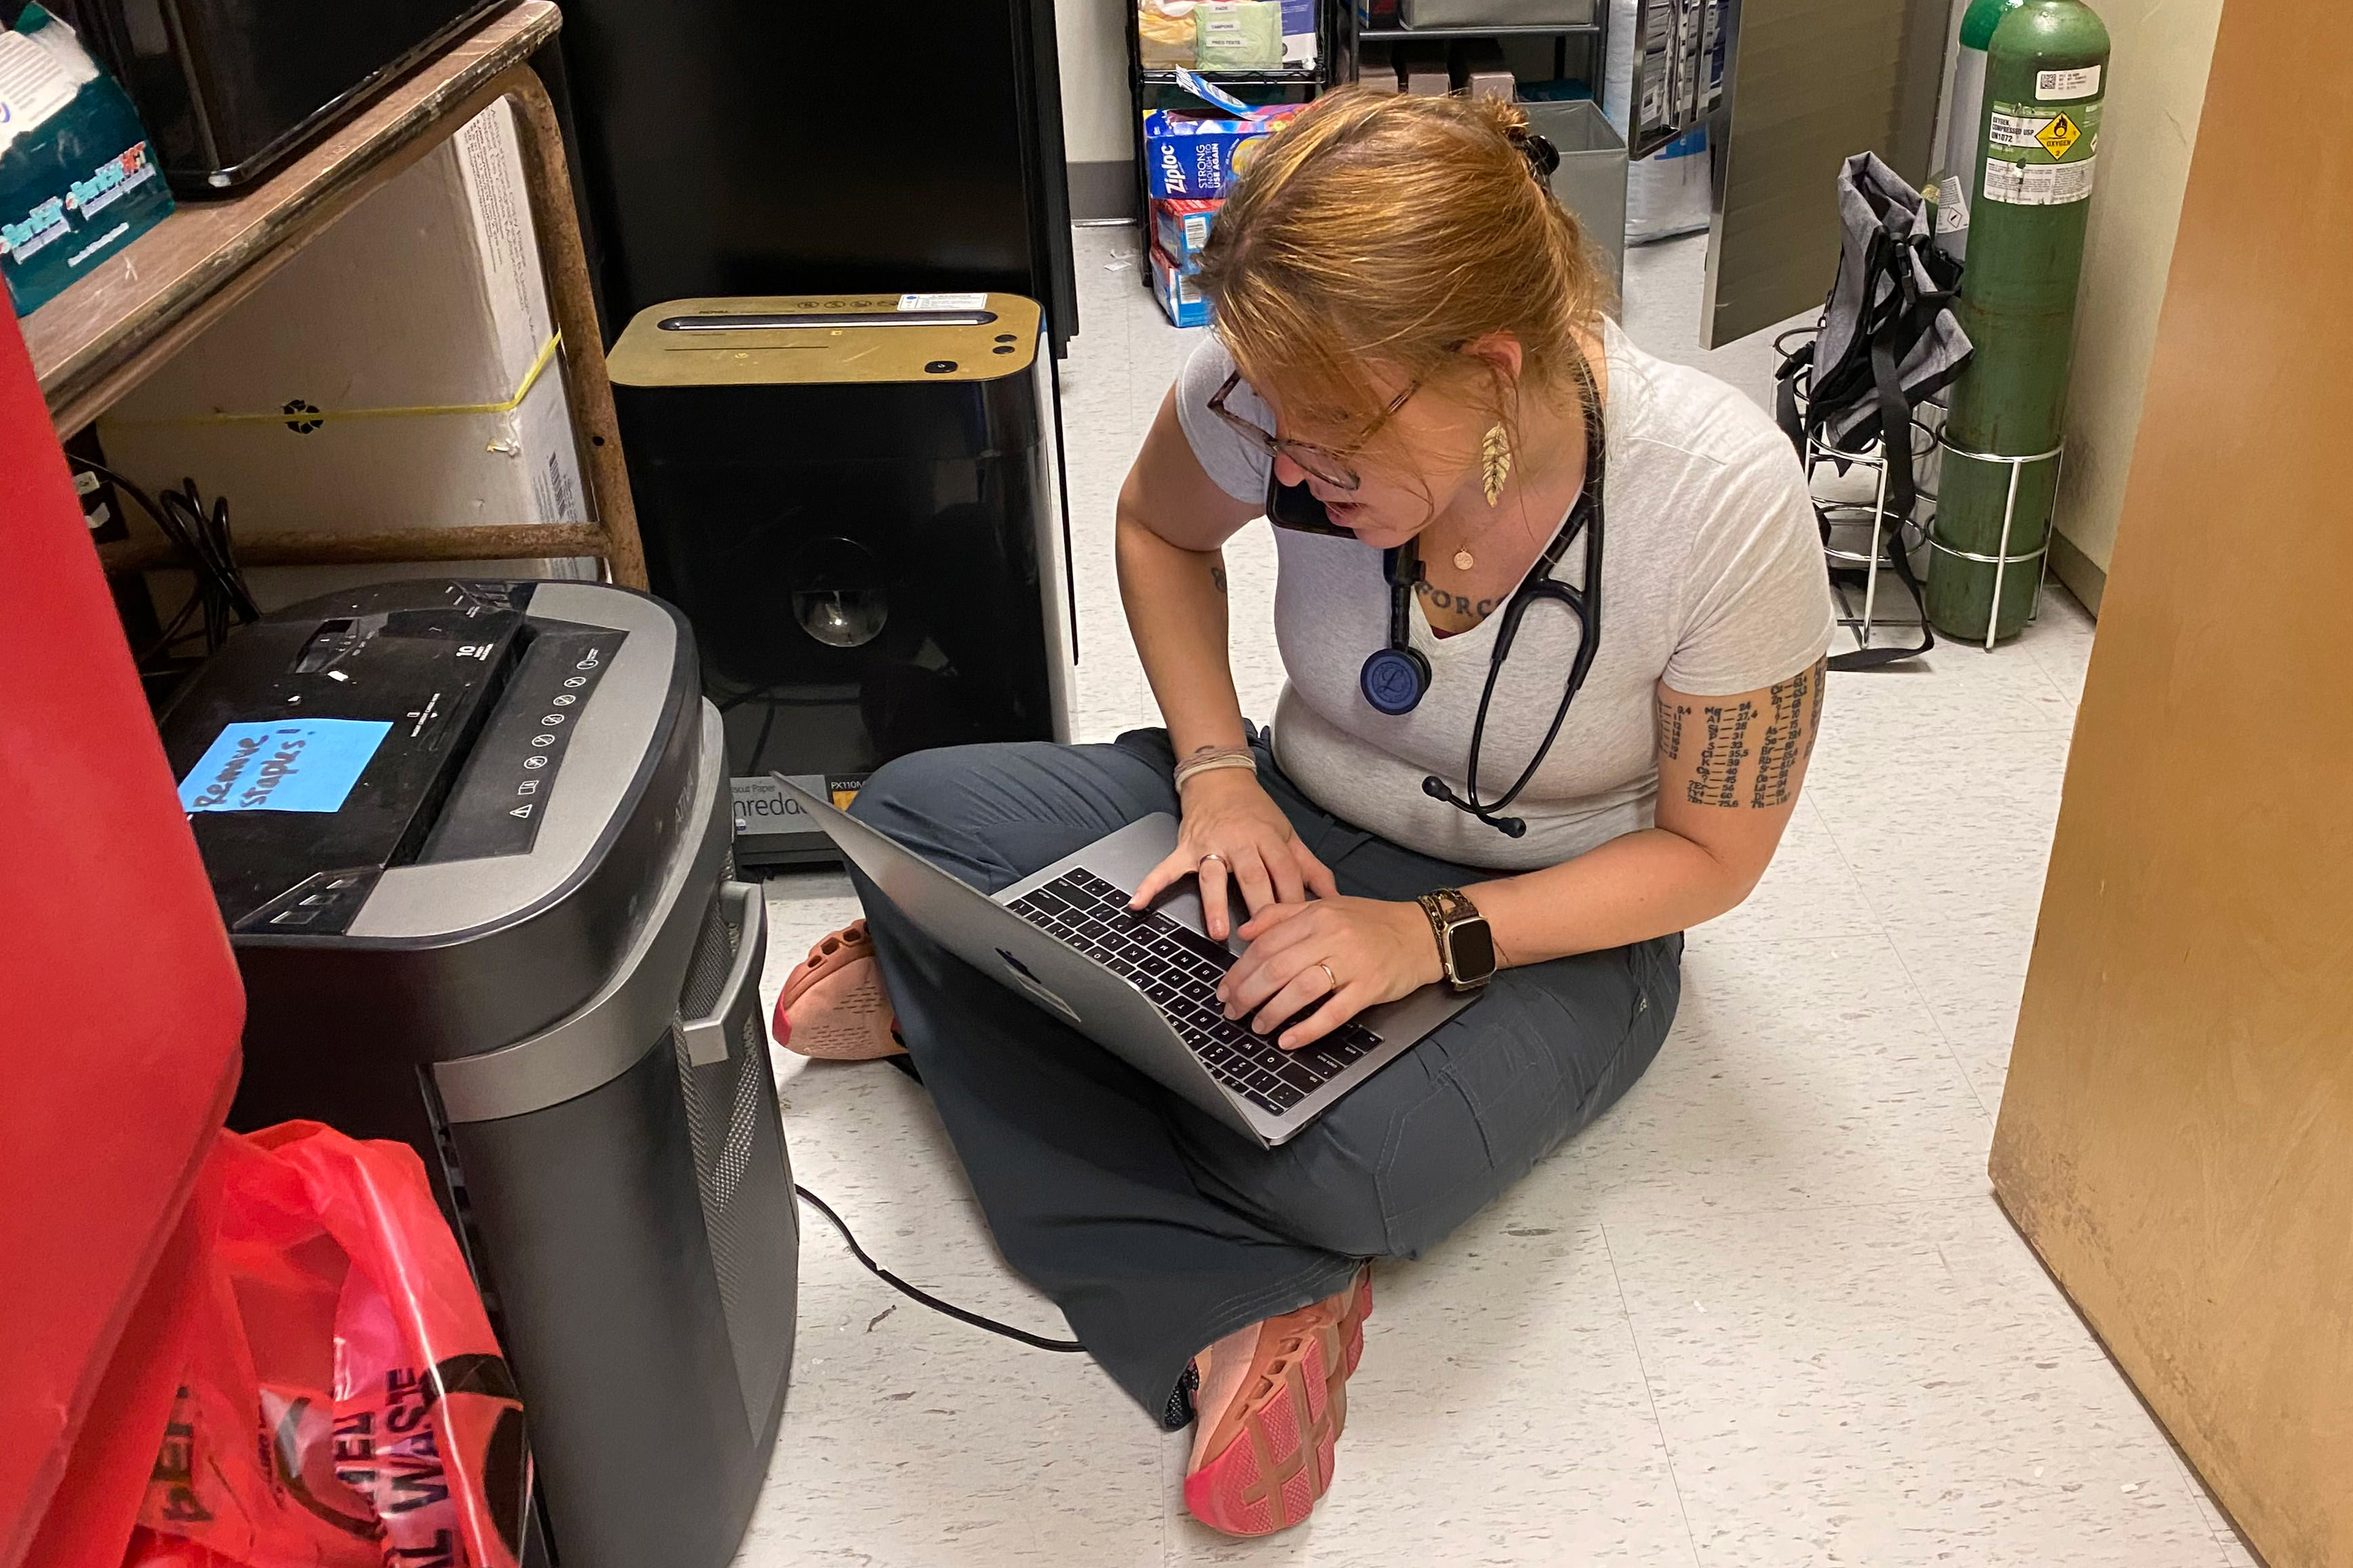 A photo of a doctor speaking on the phone while using her laptop. She is sitting on the floor.